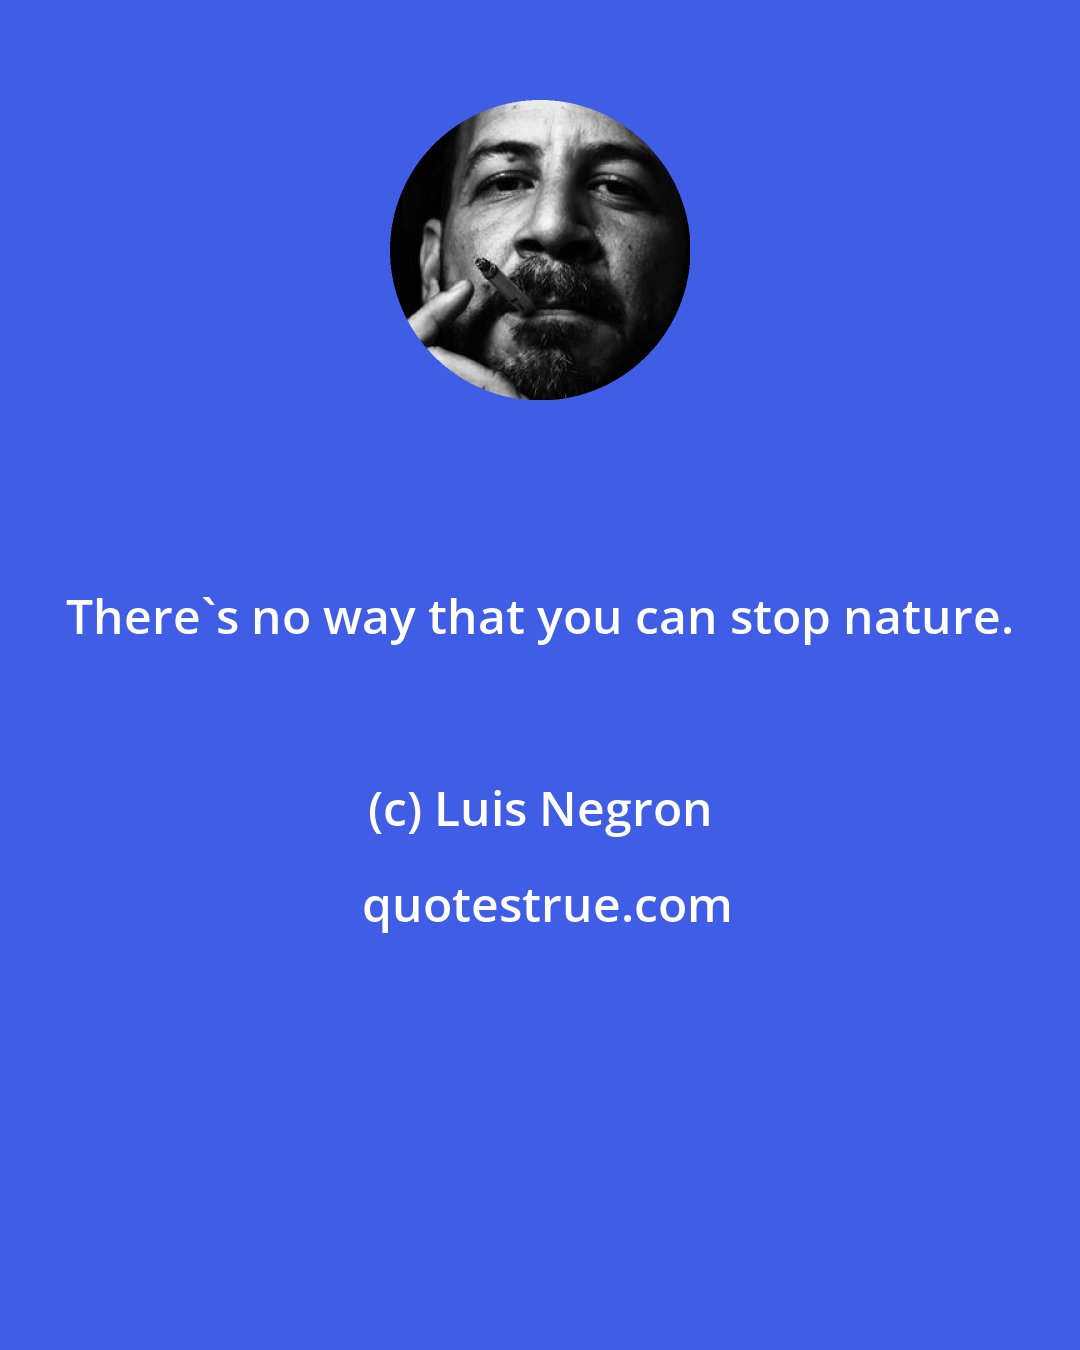 Luis Negron: There's no way that you can stop nature.